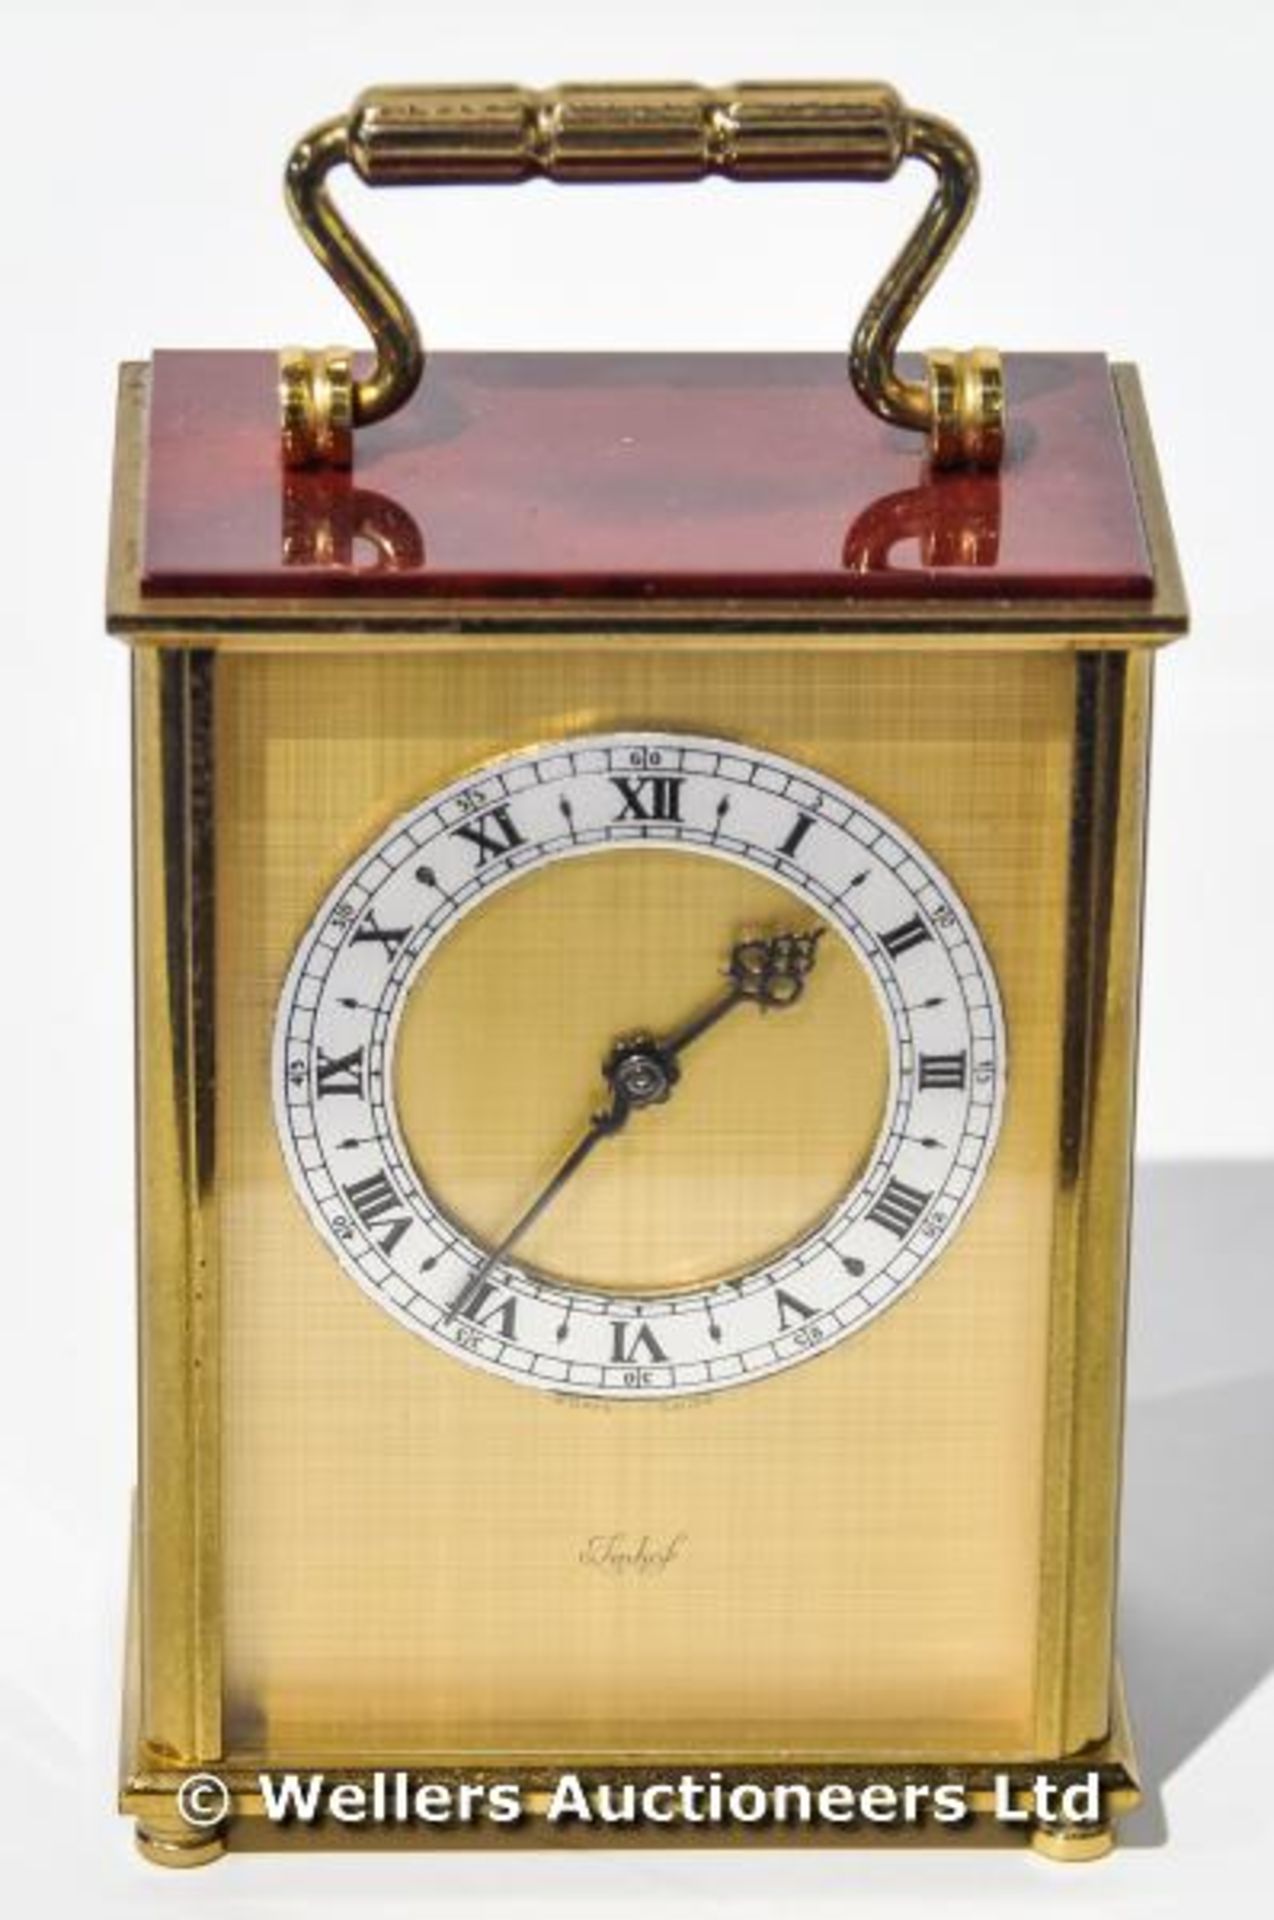 Imhof carriage clock, with Swiss movement